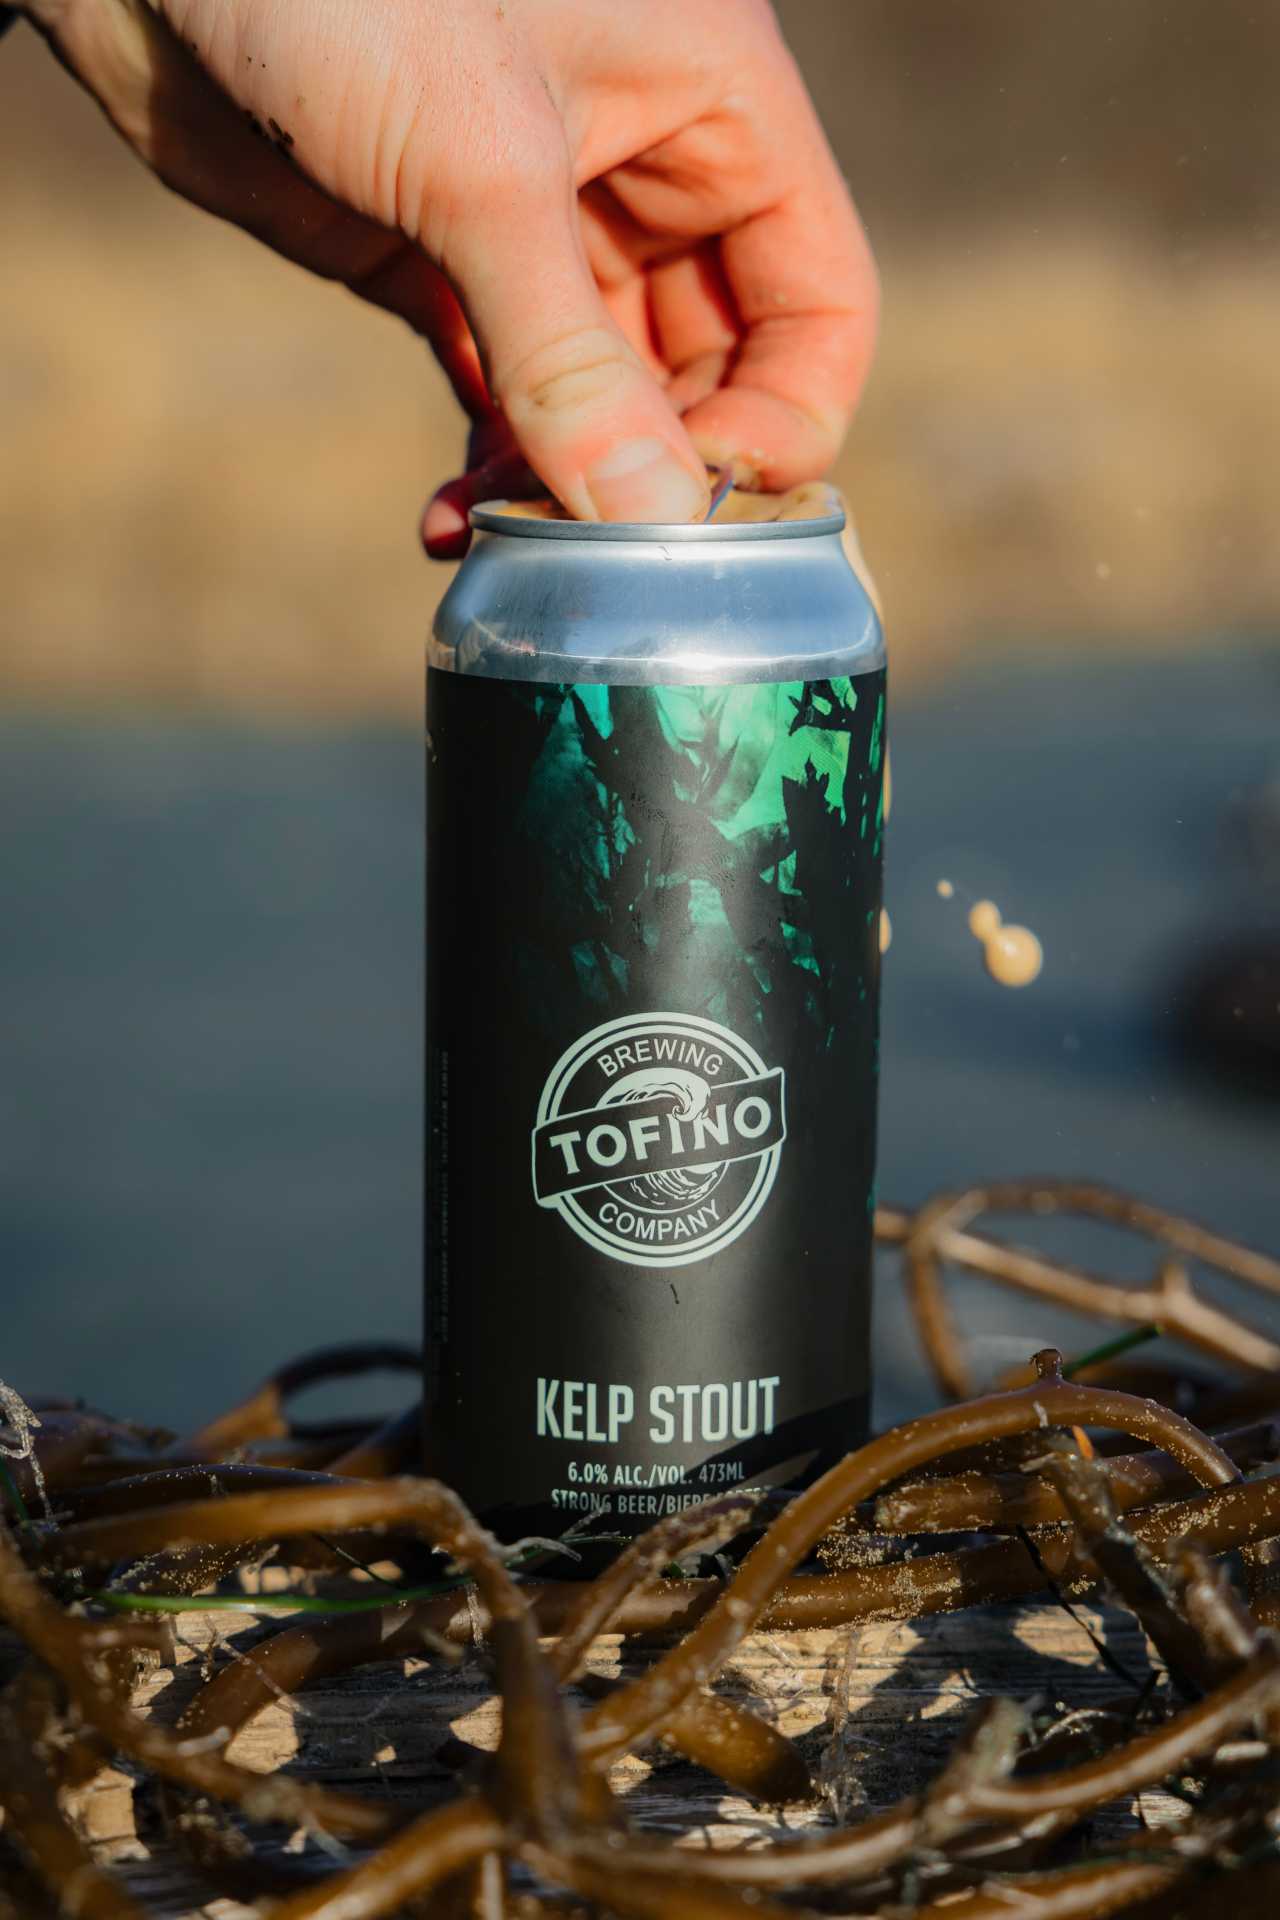 Seaweed benefits | Cracking open a can of Tofino Brewing Co.’s Kelp Stout